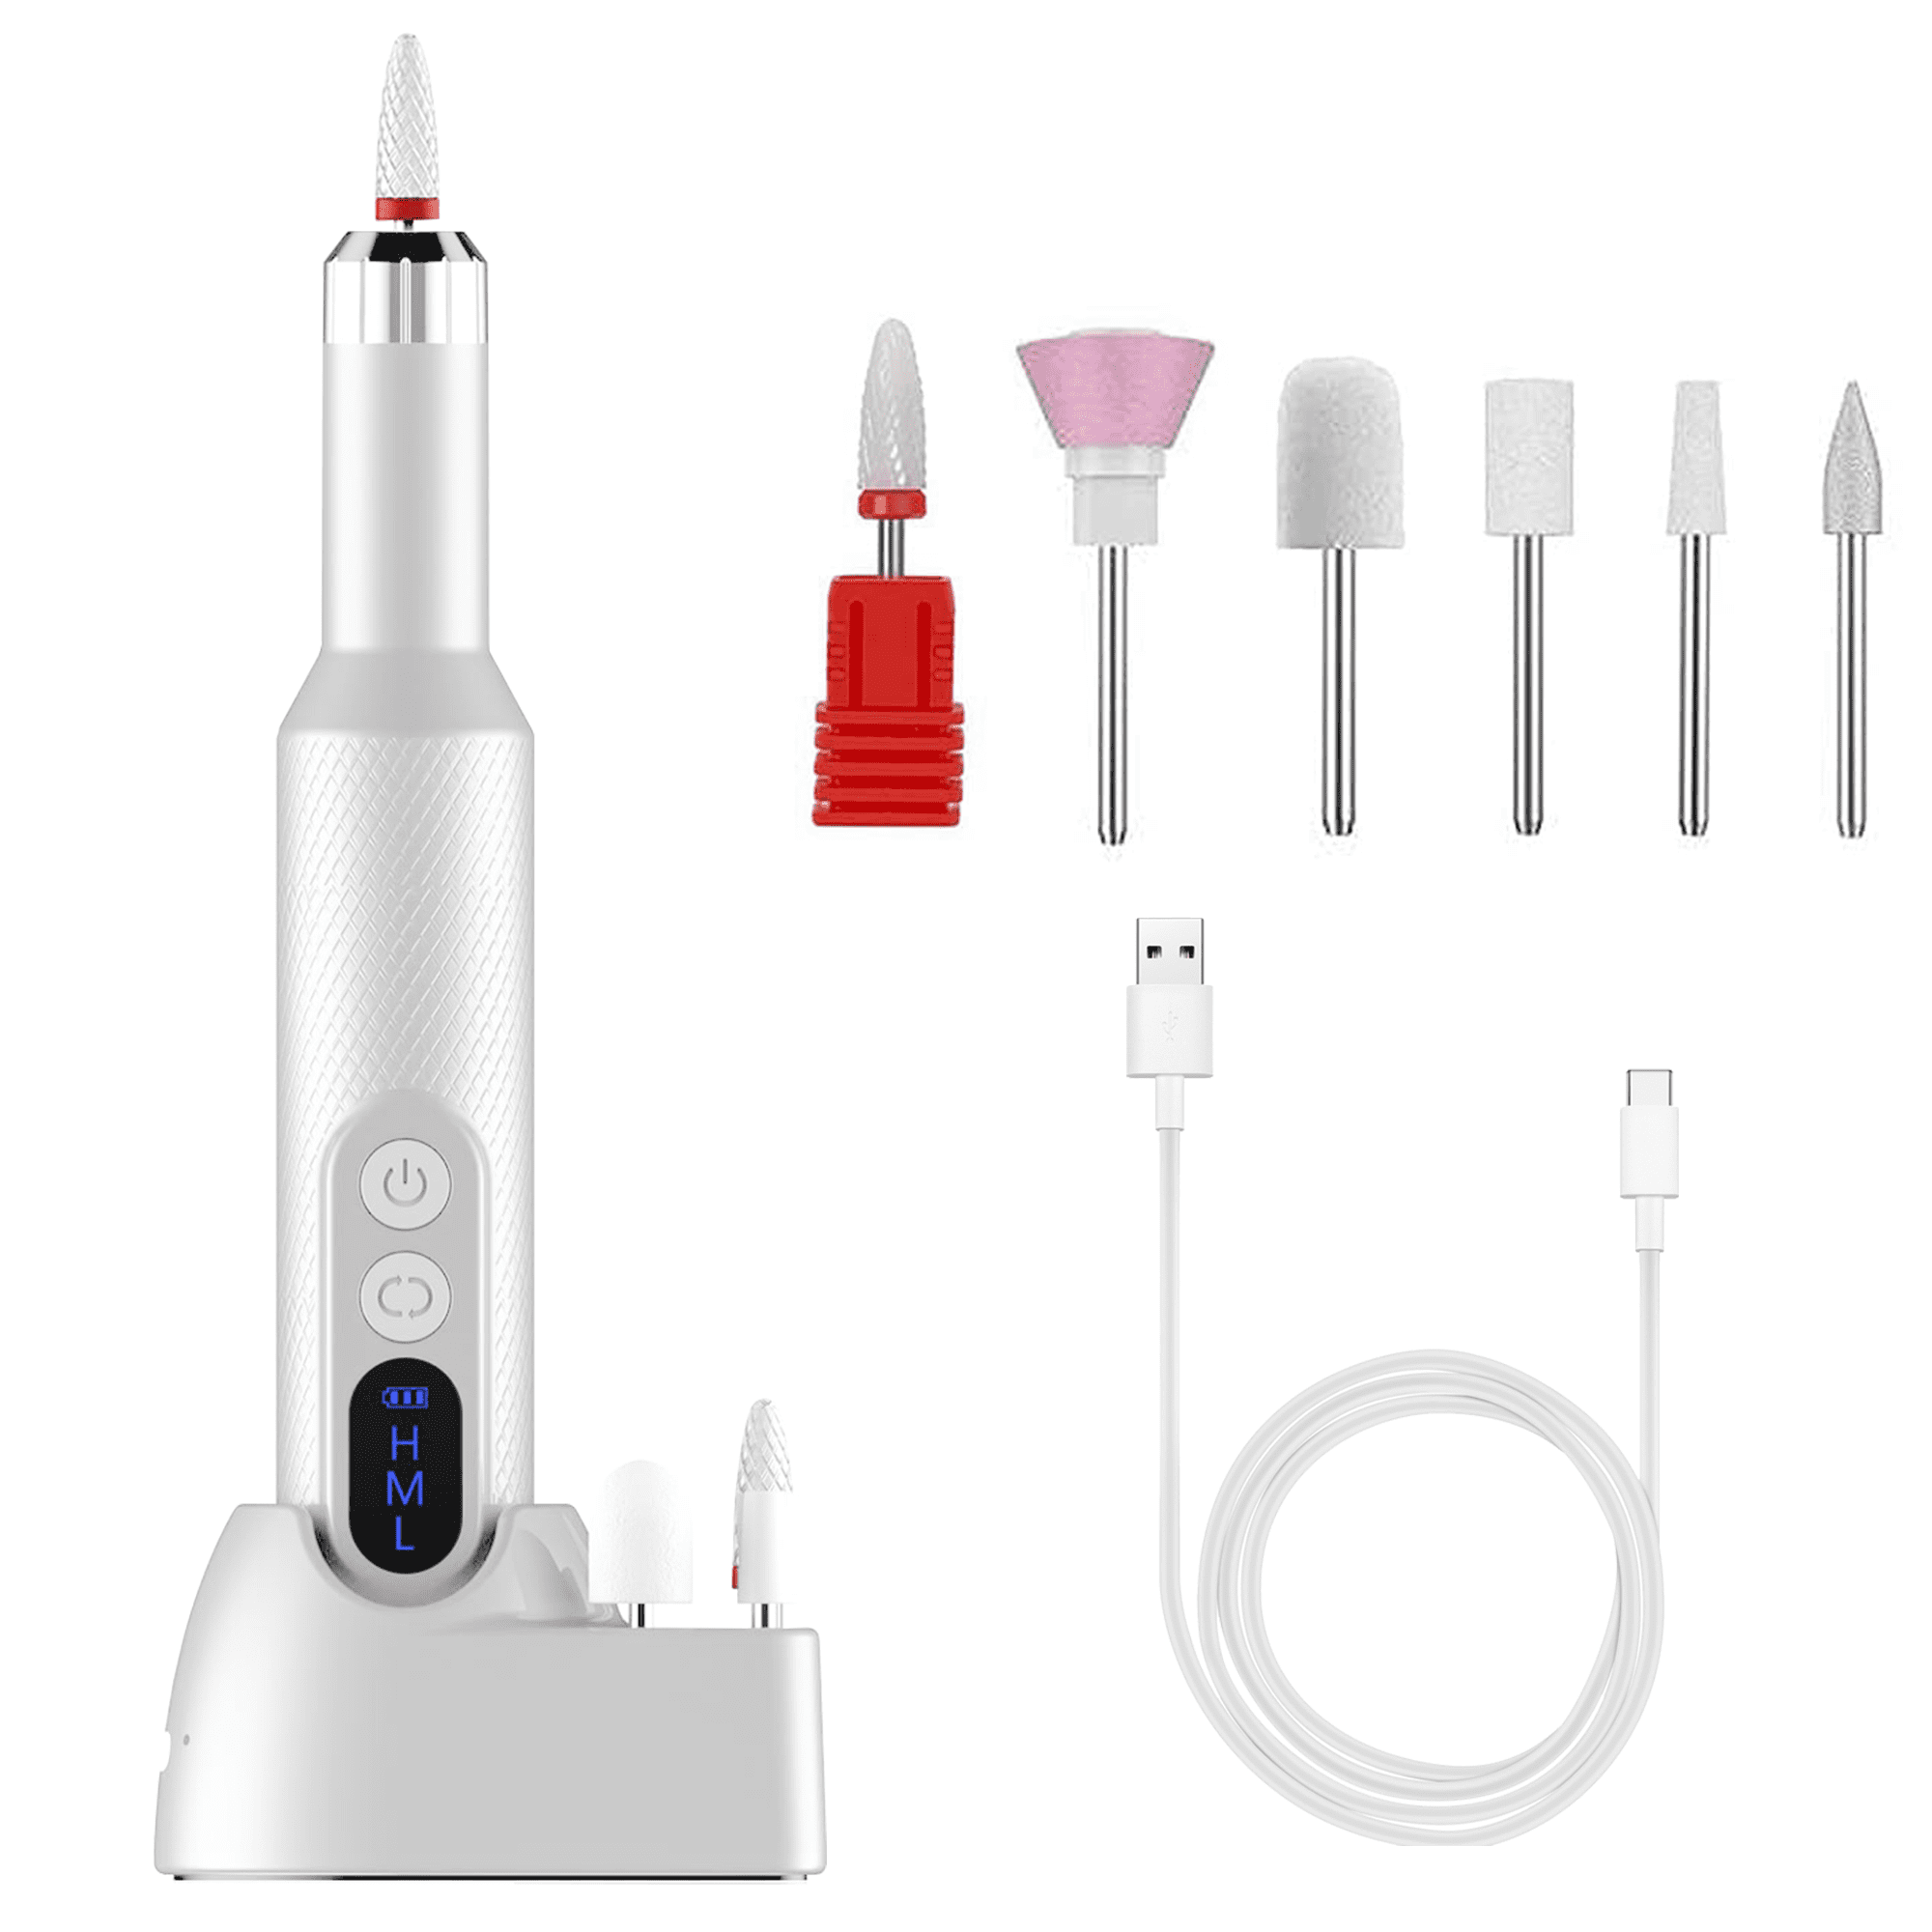 OPCUS Electric Nail File Drill Kit Manicure Pedicure Set for Women ...